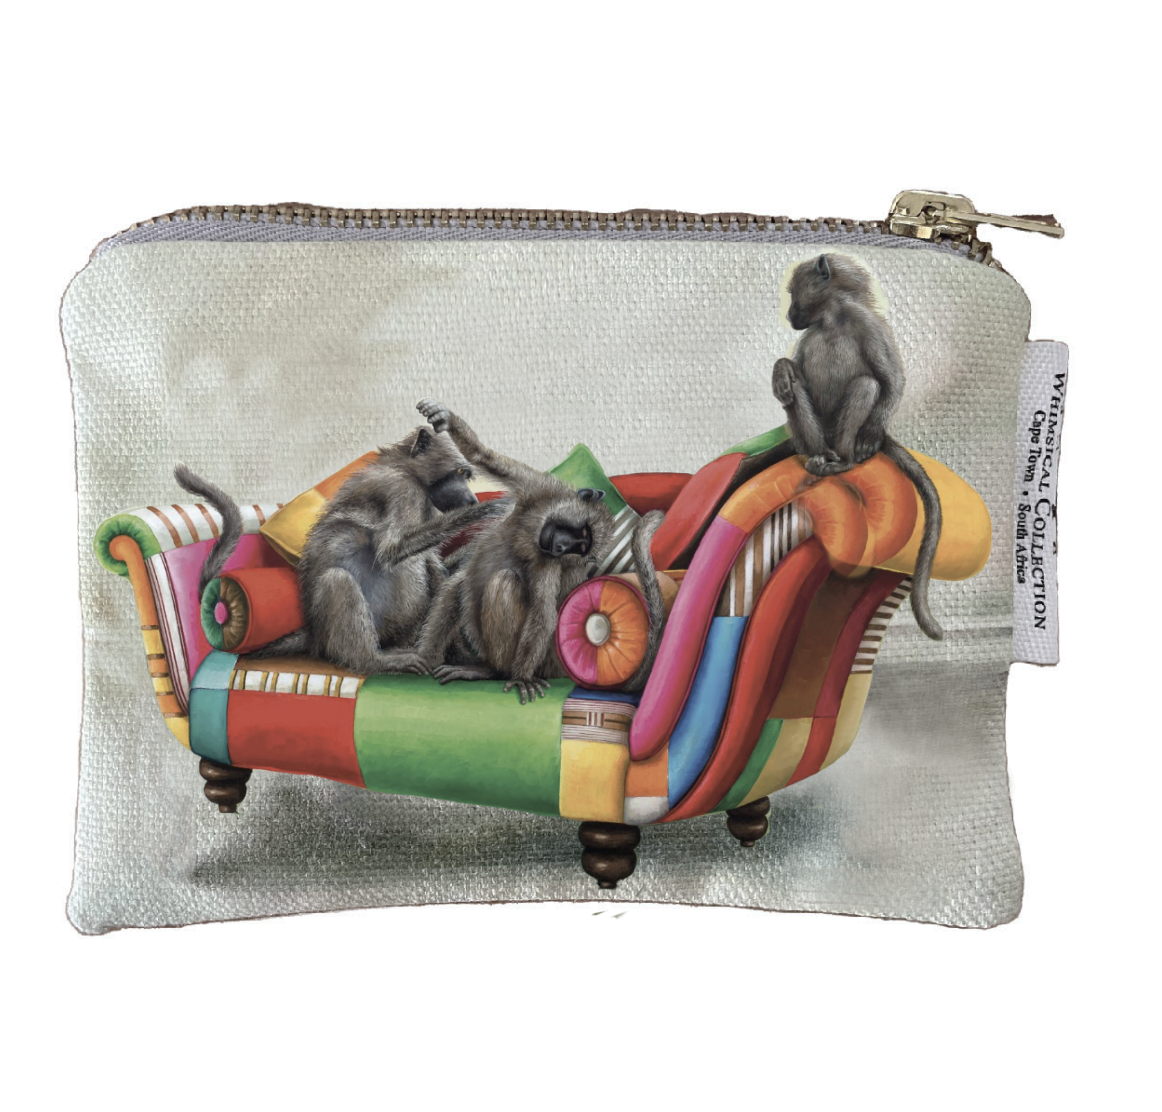 Wildlife At Leisure Coin Purse – Baboon